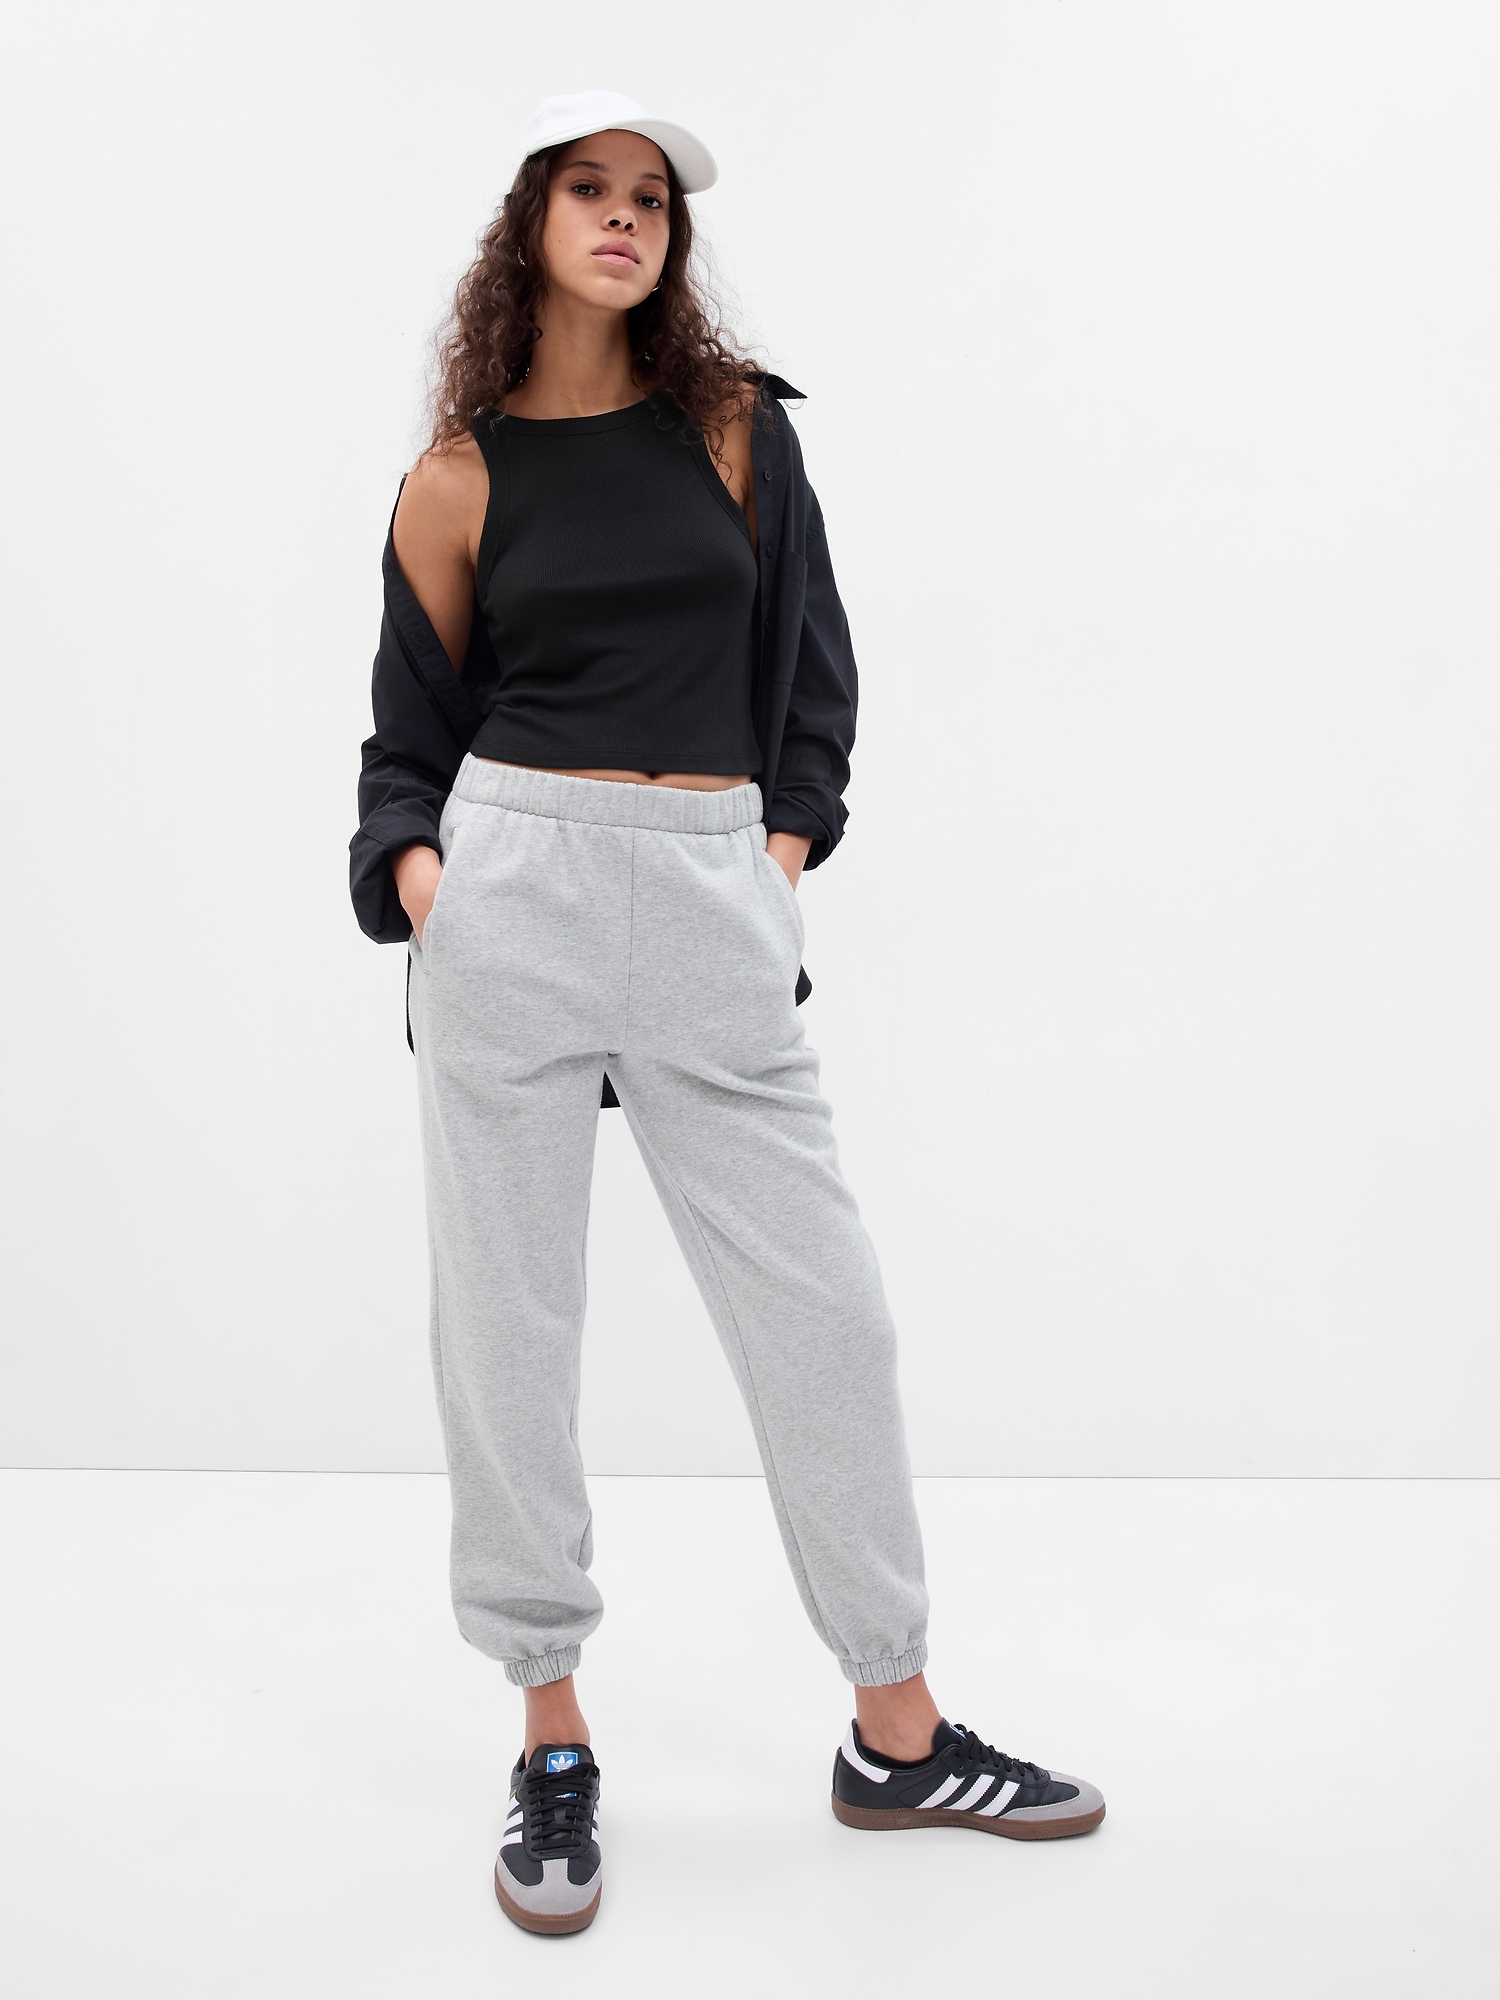 These Gap High Rise Boyfriend Joggers are the best ever